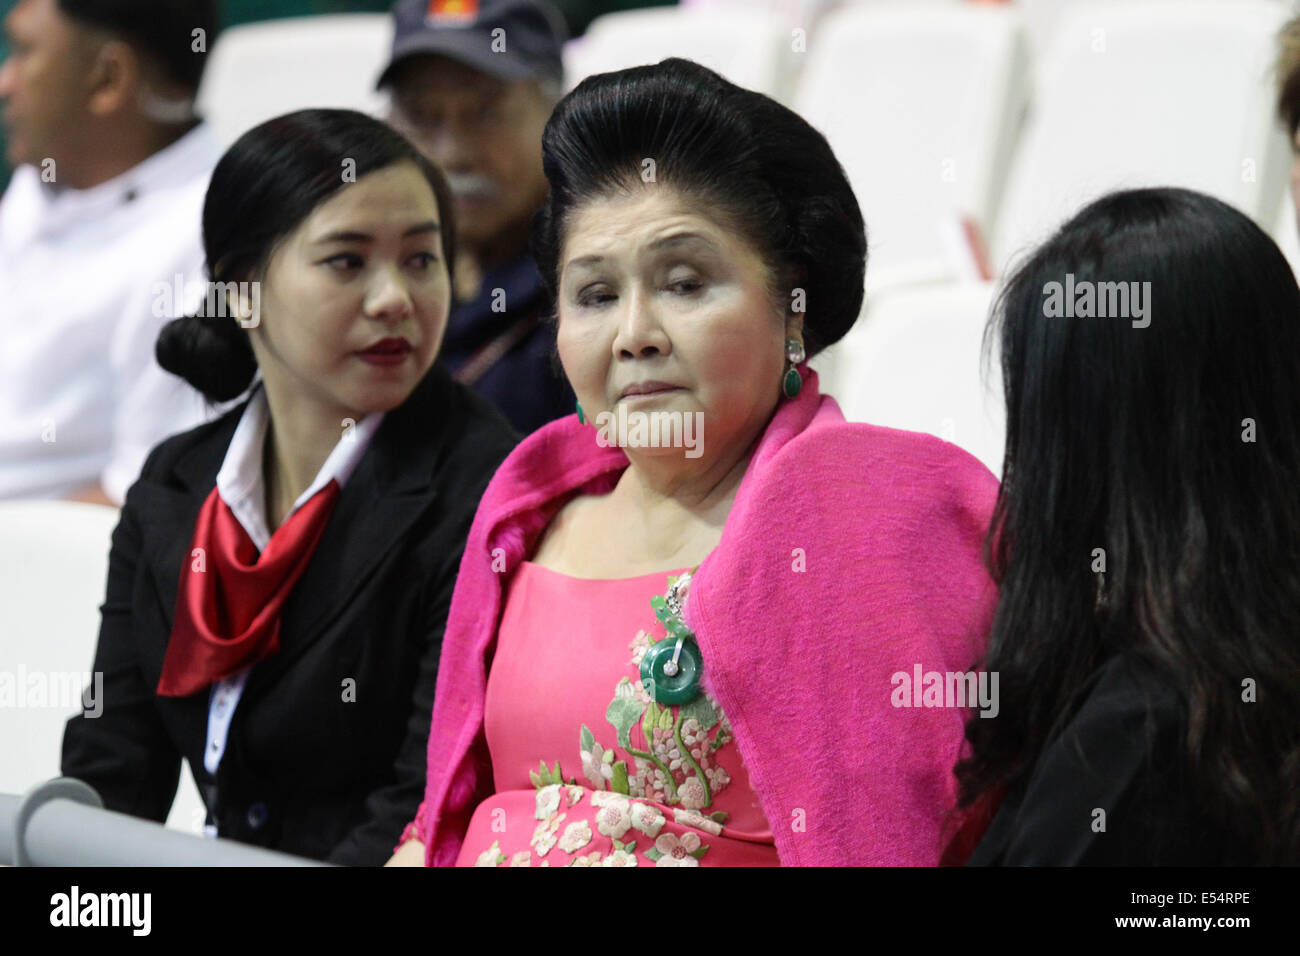 Bulacan, Philippines. 21st July, 2014. Bulacan, Philippines - Imelda Marcos, widow of former Philippine President Ferdinand Marcos, attends the inauguration of the Philippine Arena on July 21, 2014. The inauguration of the multi-purpose complex was lead by Inglesia Ni Cristo Executive Minister Brother Eduardo V. Manalo and President Benigno Aquino III. The Philippine Arena, touted as the world's largest domed arena with a 55,000 seating capacity whose construction cost over $200 million is built to withstand strong earthquakes and super typhoon winds. Credit:  ZUMA Press, Inc./Alamy Live News Stock Photo